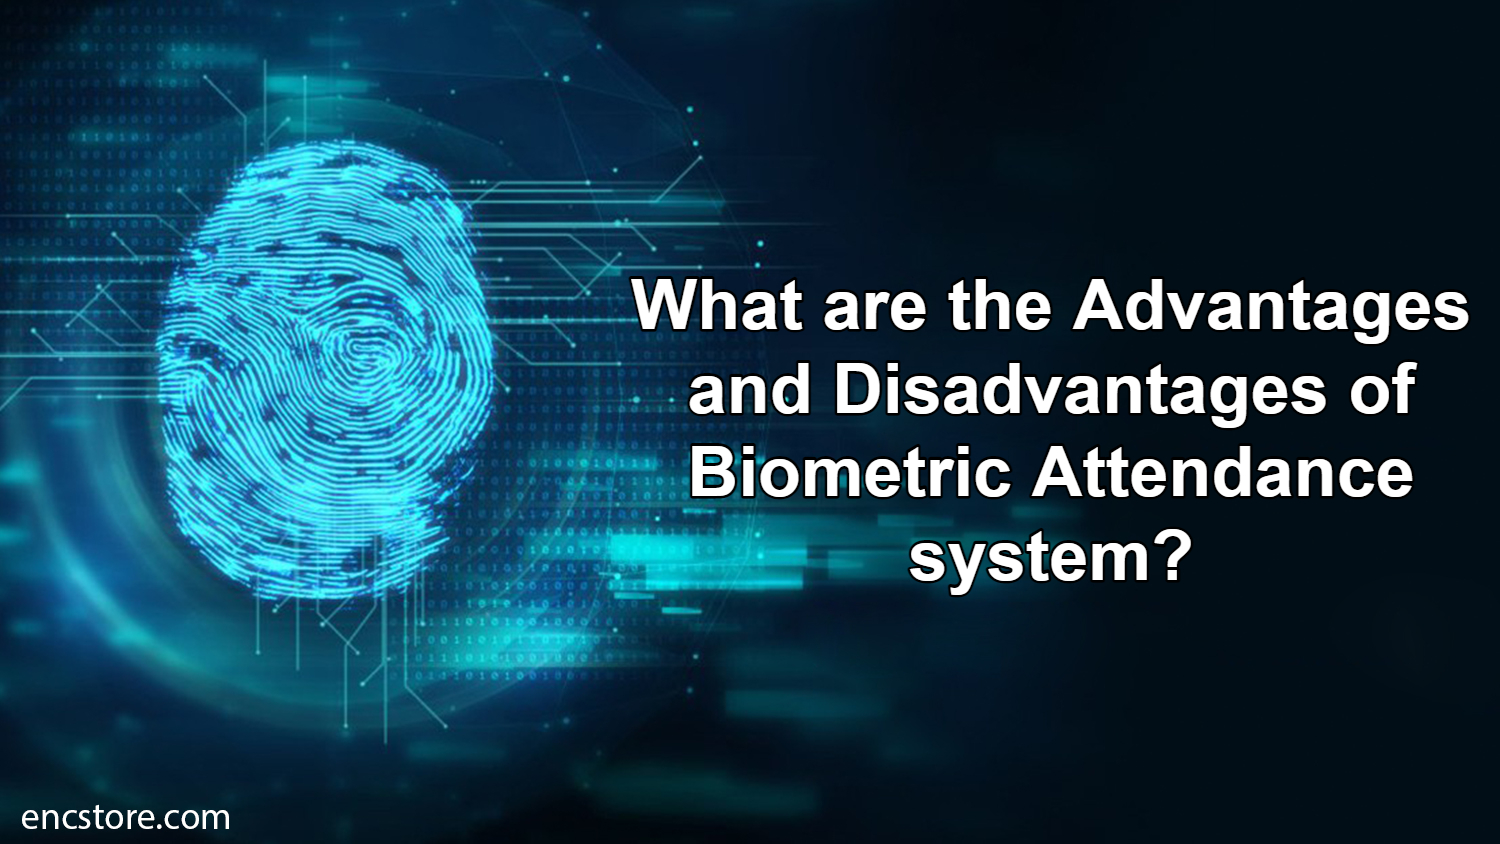 Advantages and Disadvantages of Biometric Attendance system